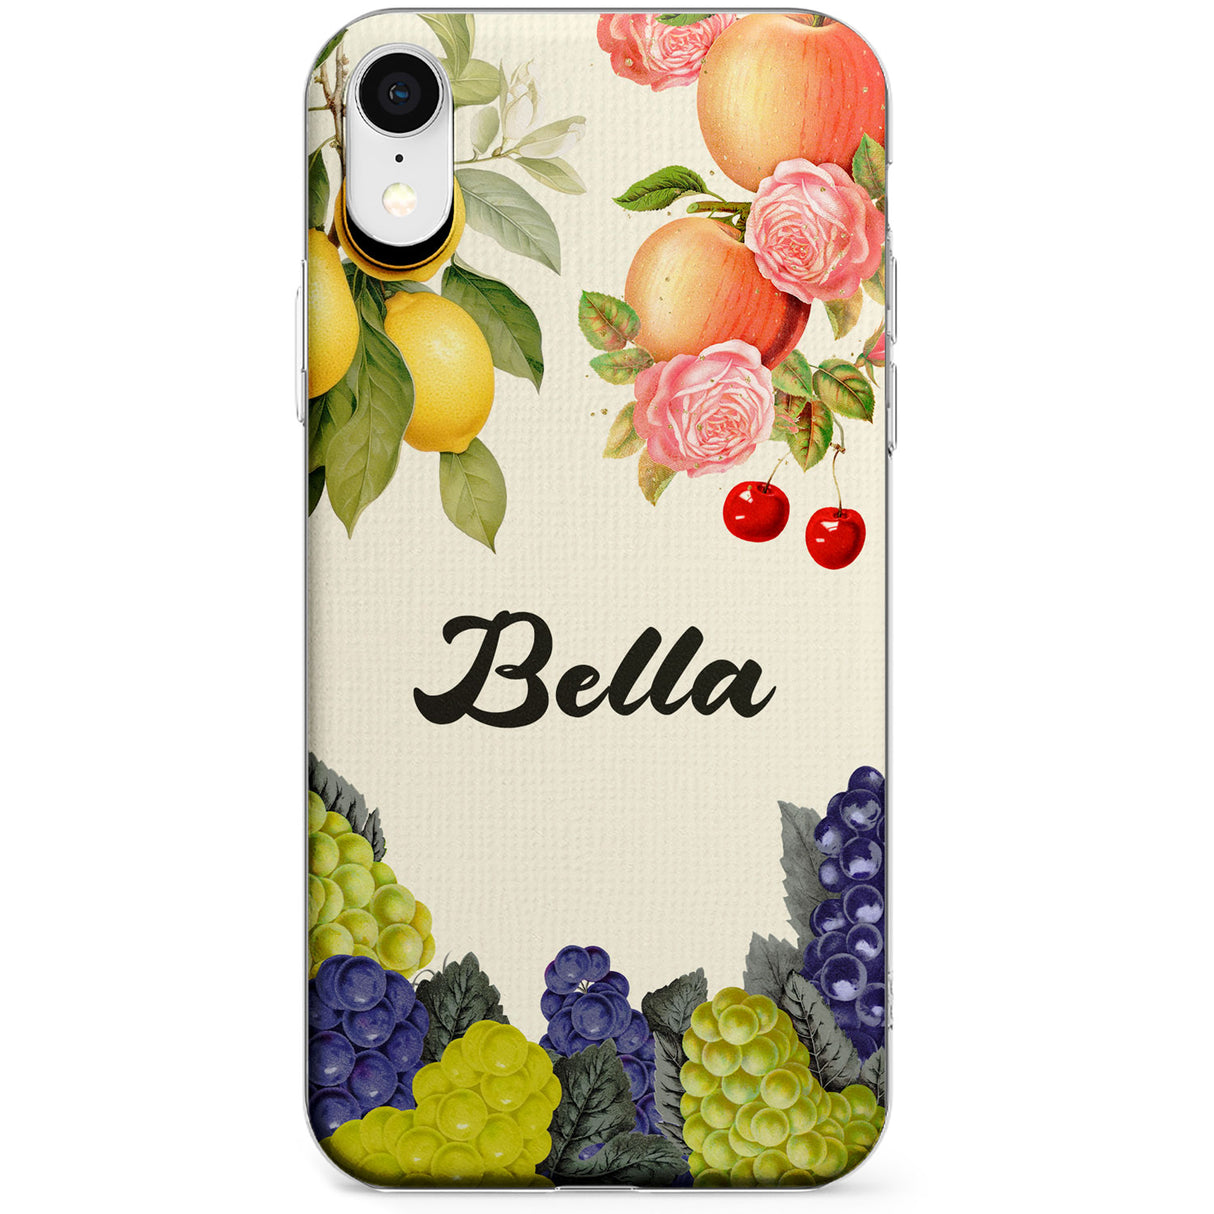 Personalised Vintage Fruits Phone Case for iPhone X, XS Max, XR